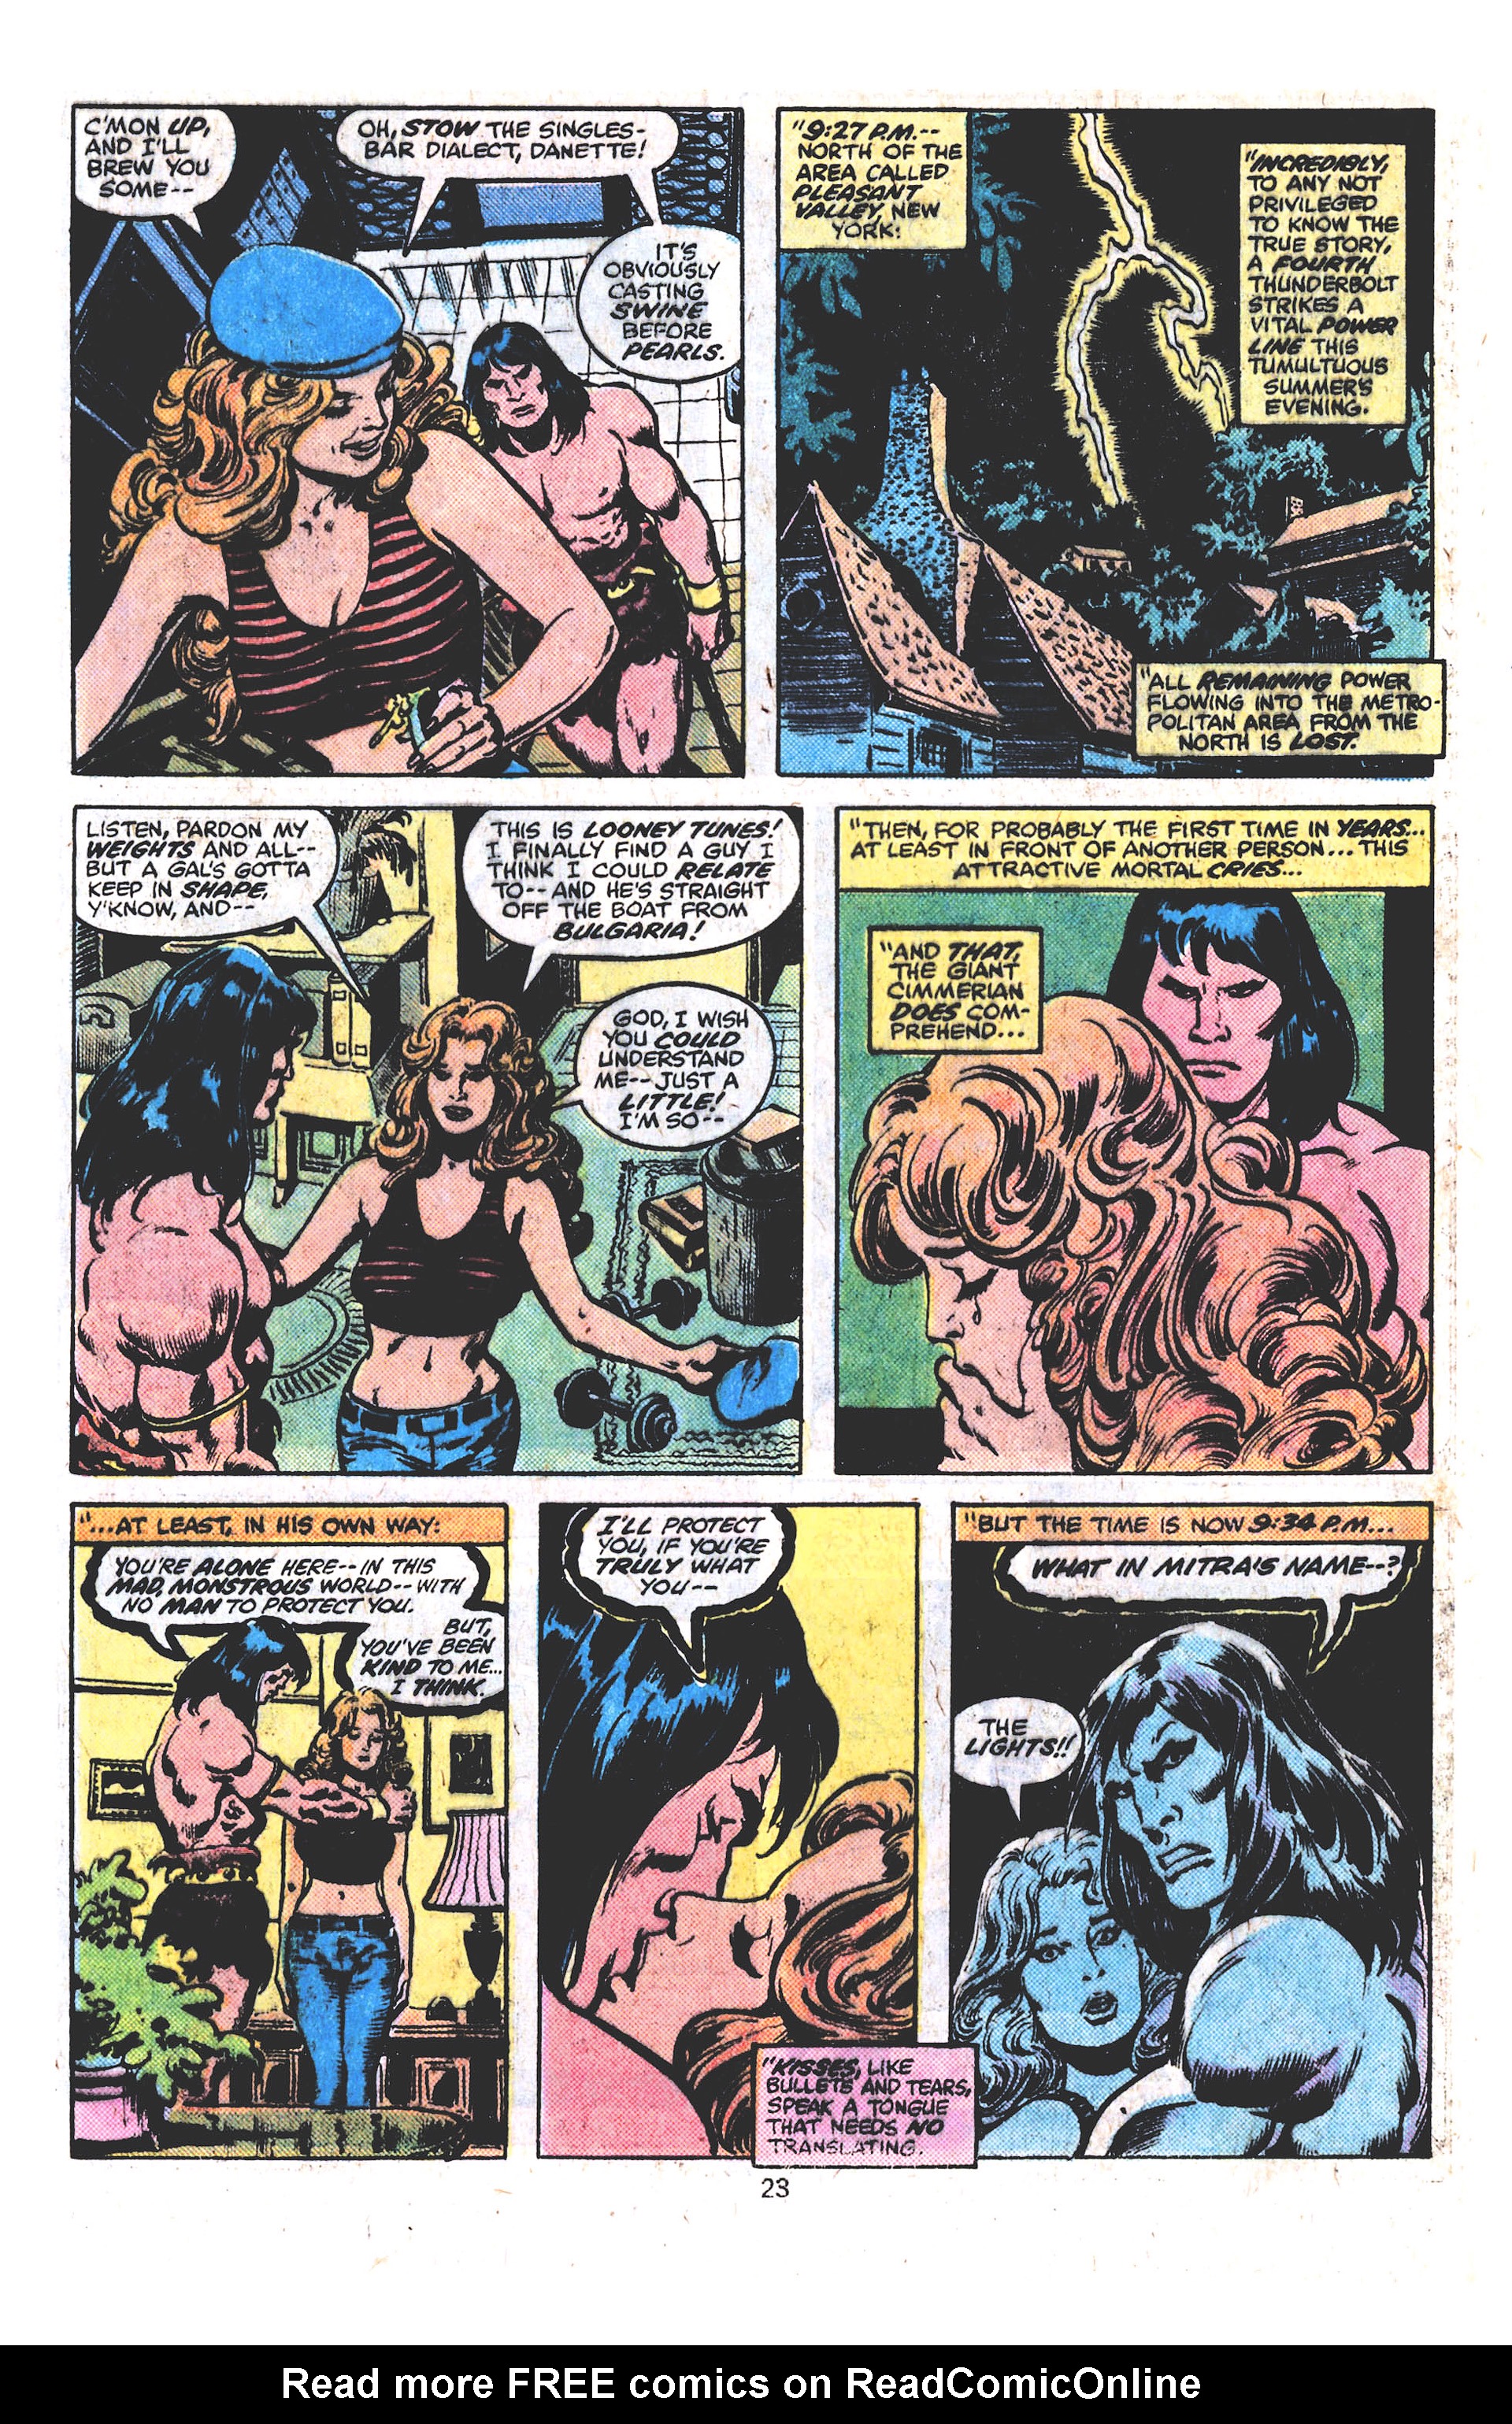 What If? (1977) Issue #13 - Conan The Barbarian walked the Earth Today #13 - English 18